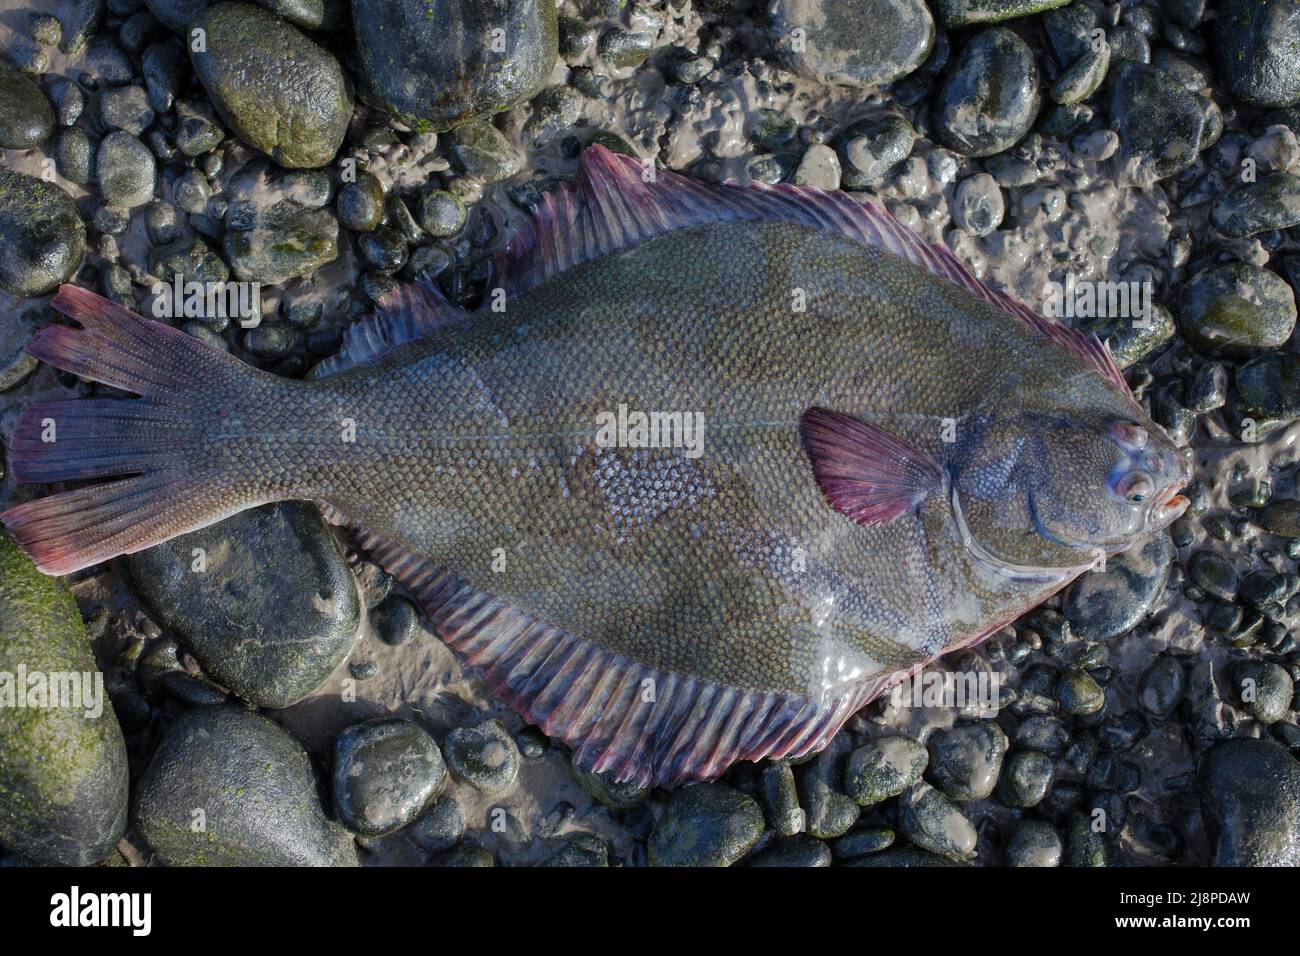 Greenback Flounder (Rhombosolea tapirina) from New Zealand waters. Green dorsal scales and off-white ventral scales (underside). Stock Photo